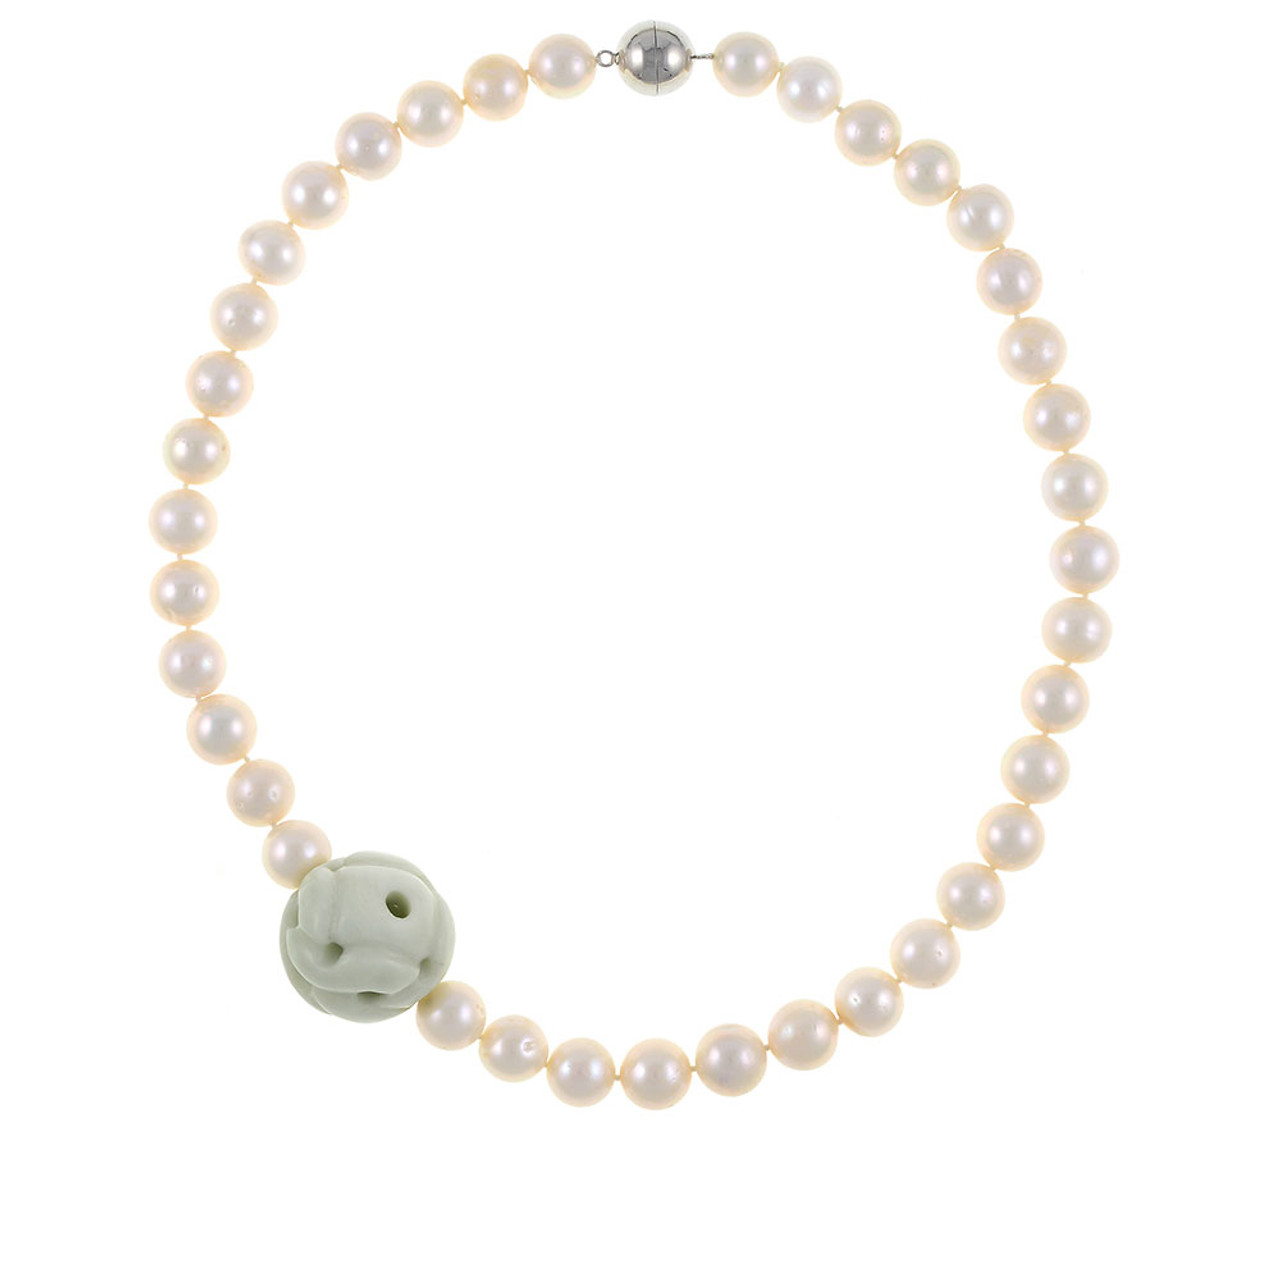 PEARL Necklace: Statement Sized Carved Jade & White PEARLS